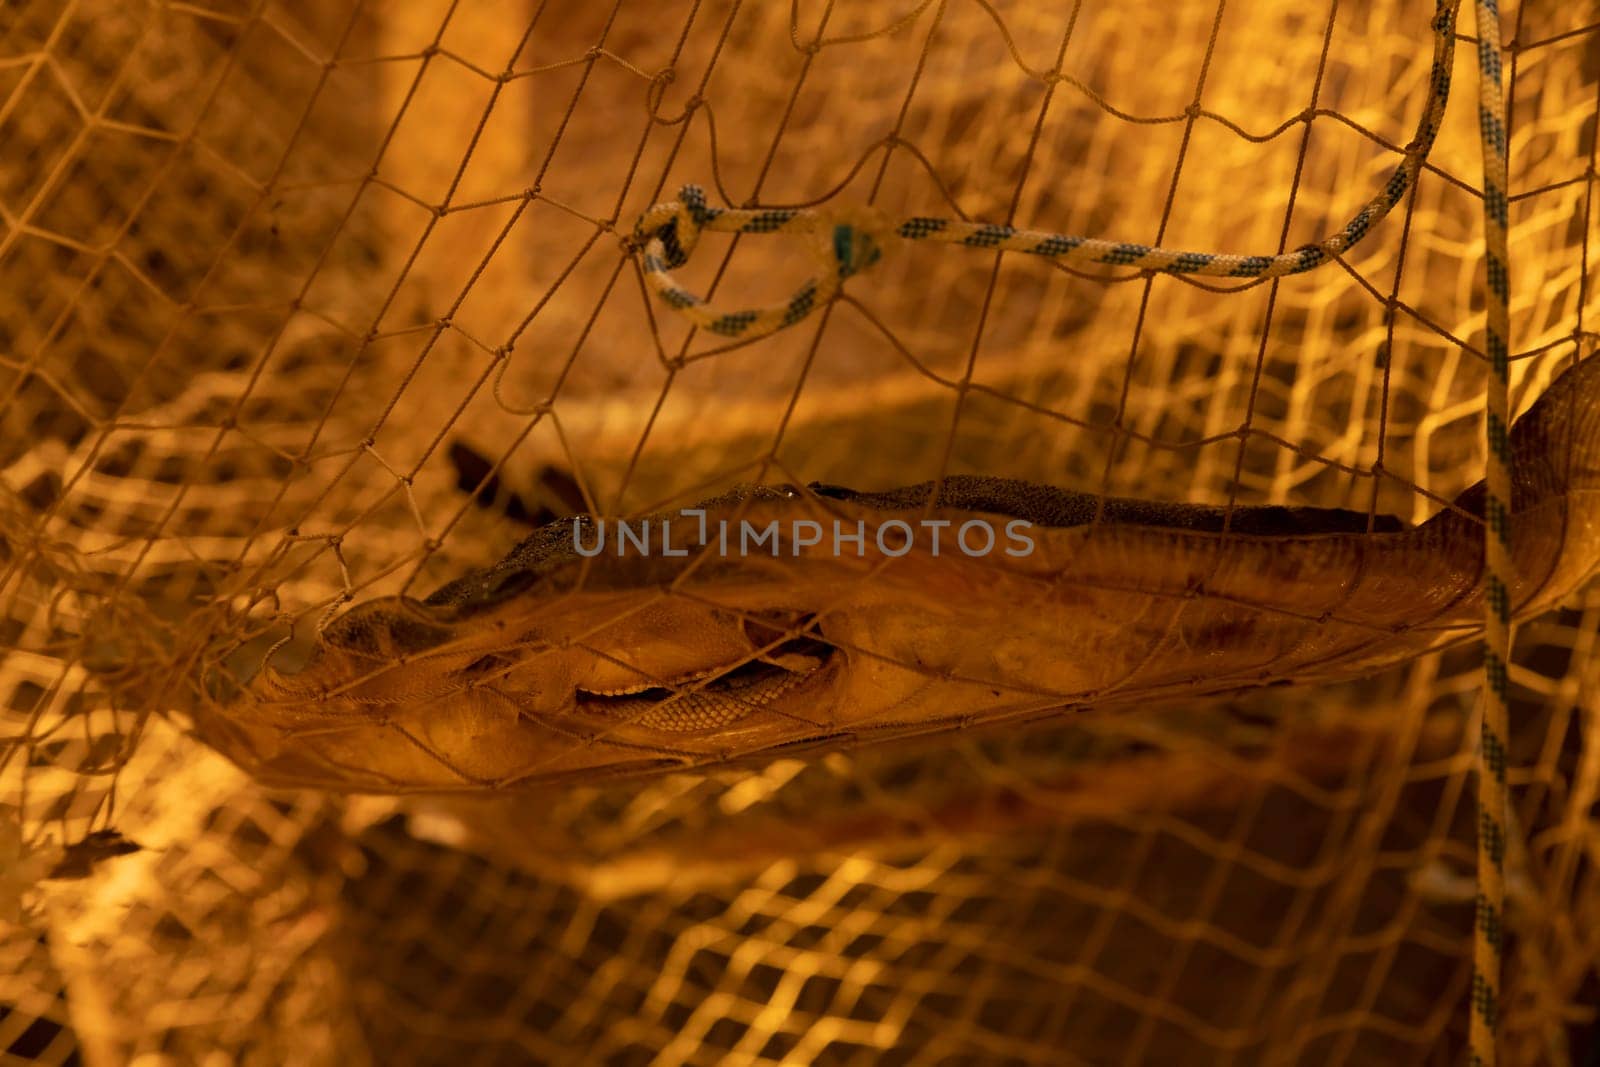 a flatfish like this ray in a fishing net by compuinfoto